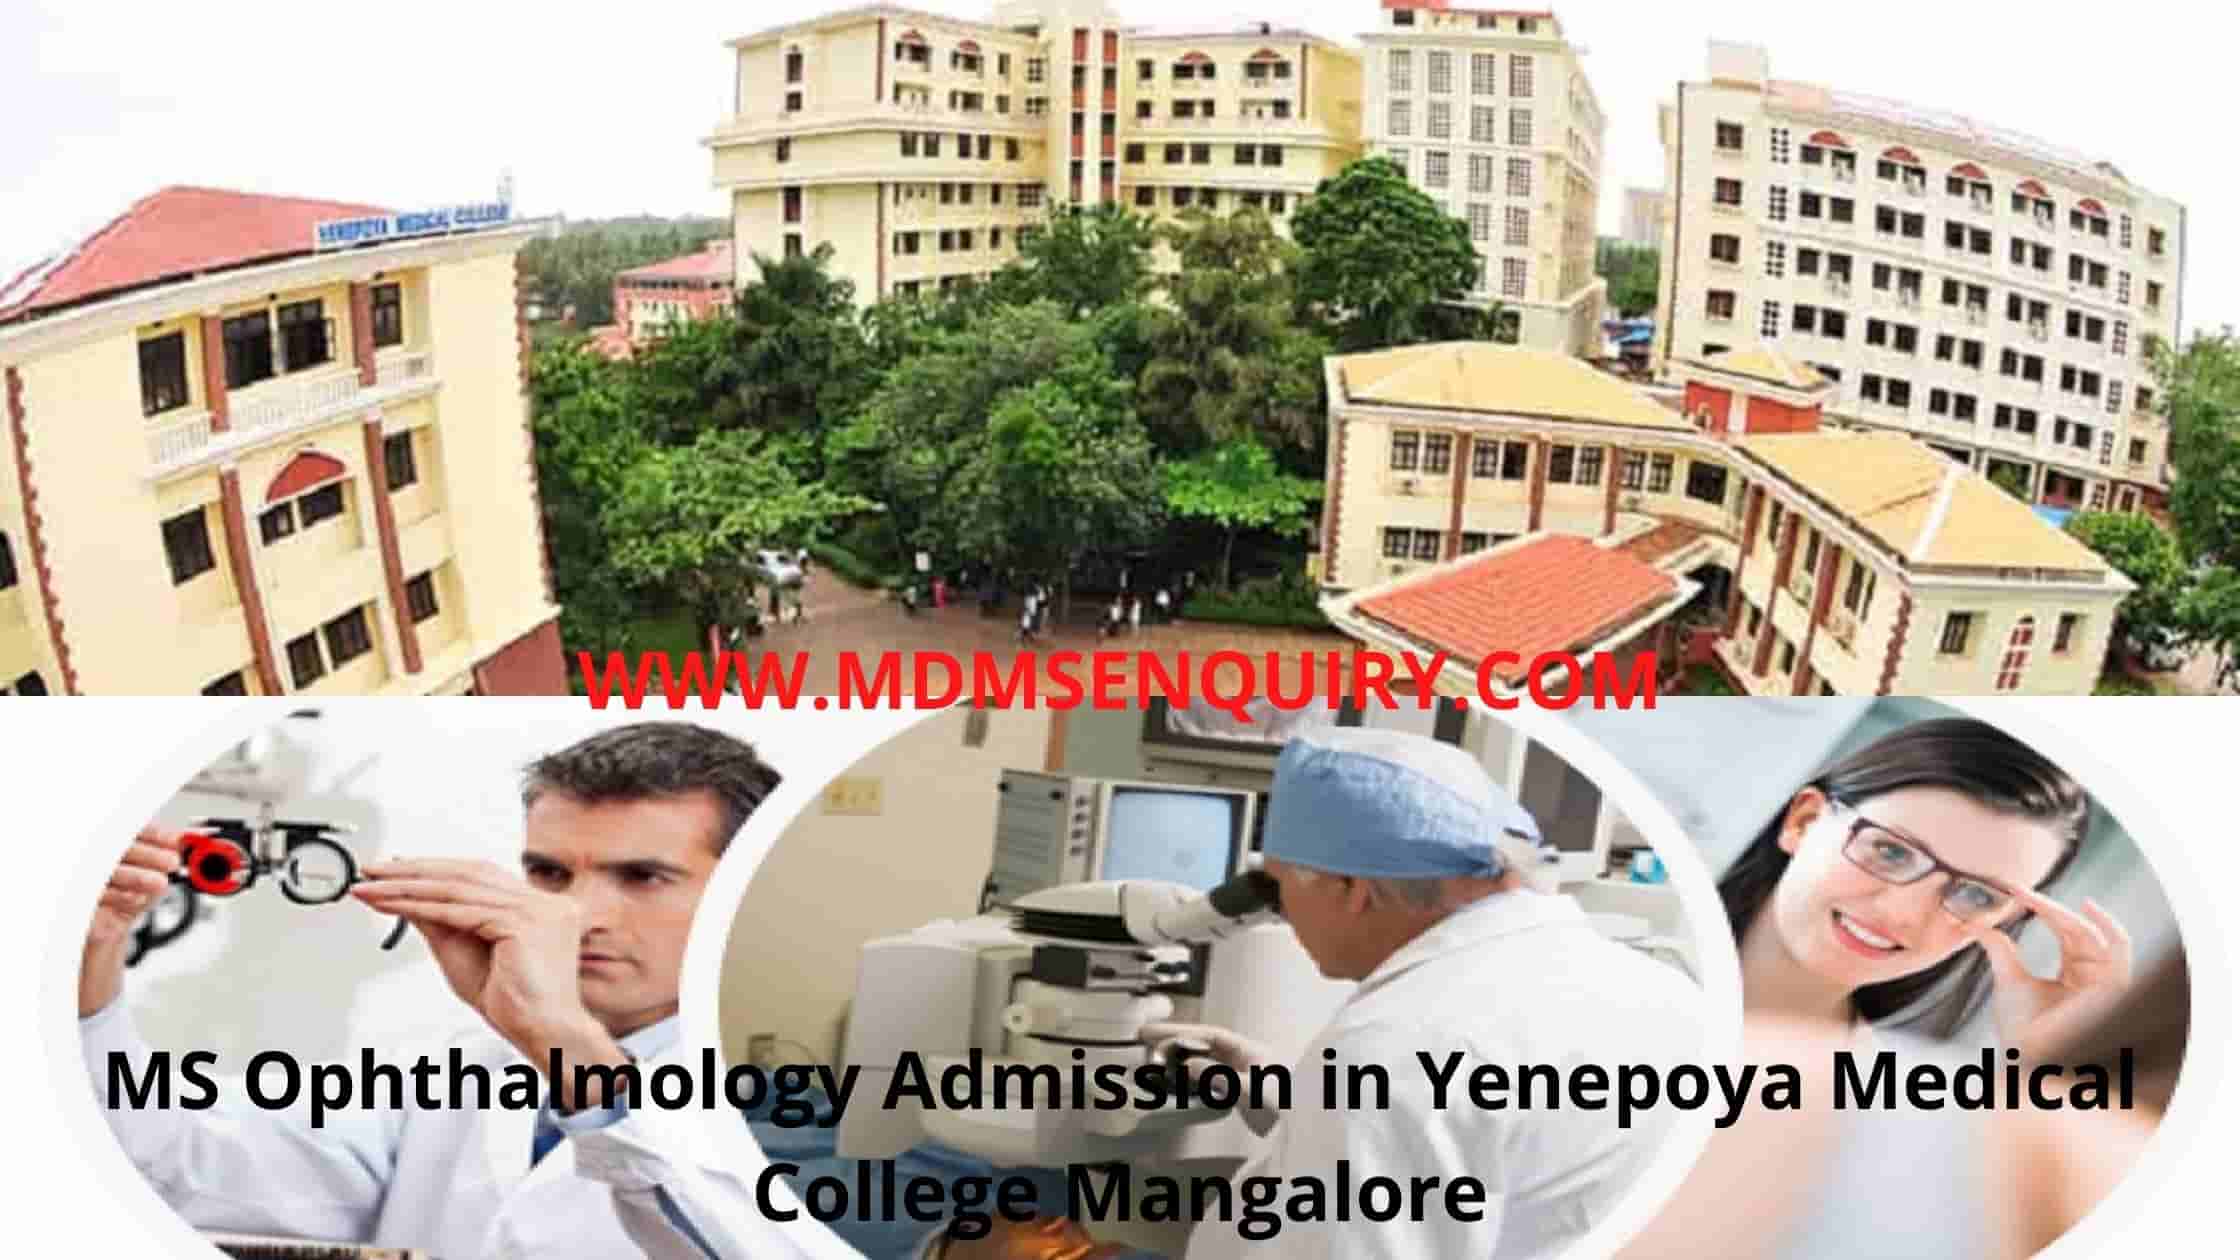 MS Ophthalmology Admission in Yenepoya Medical College Mangalore